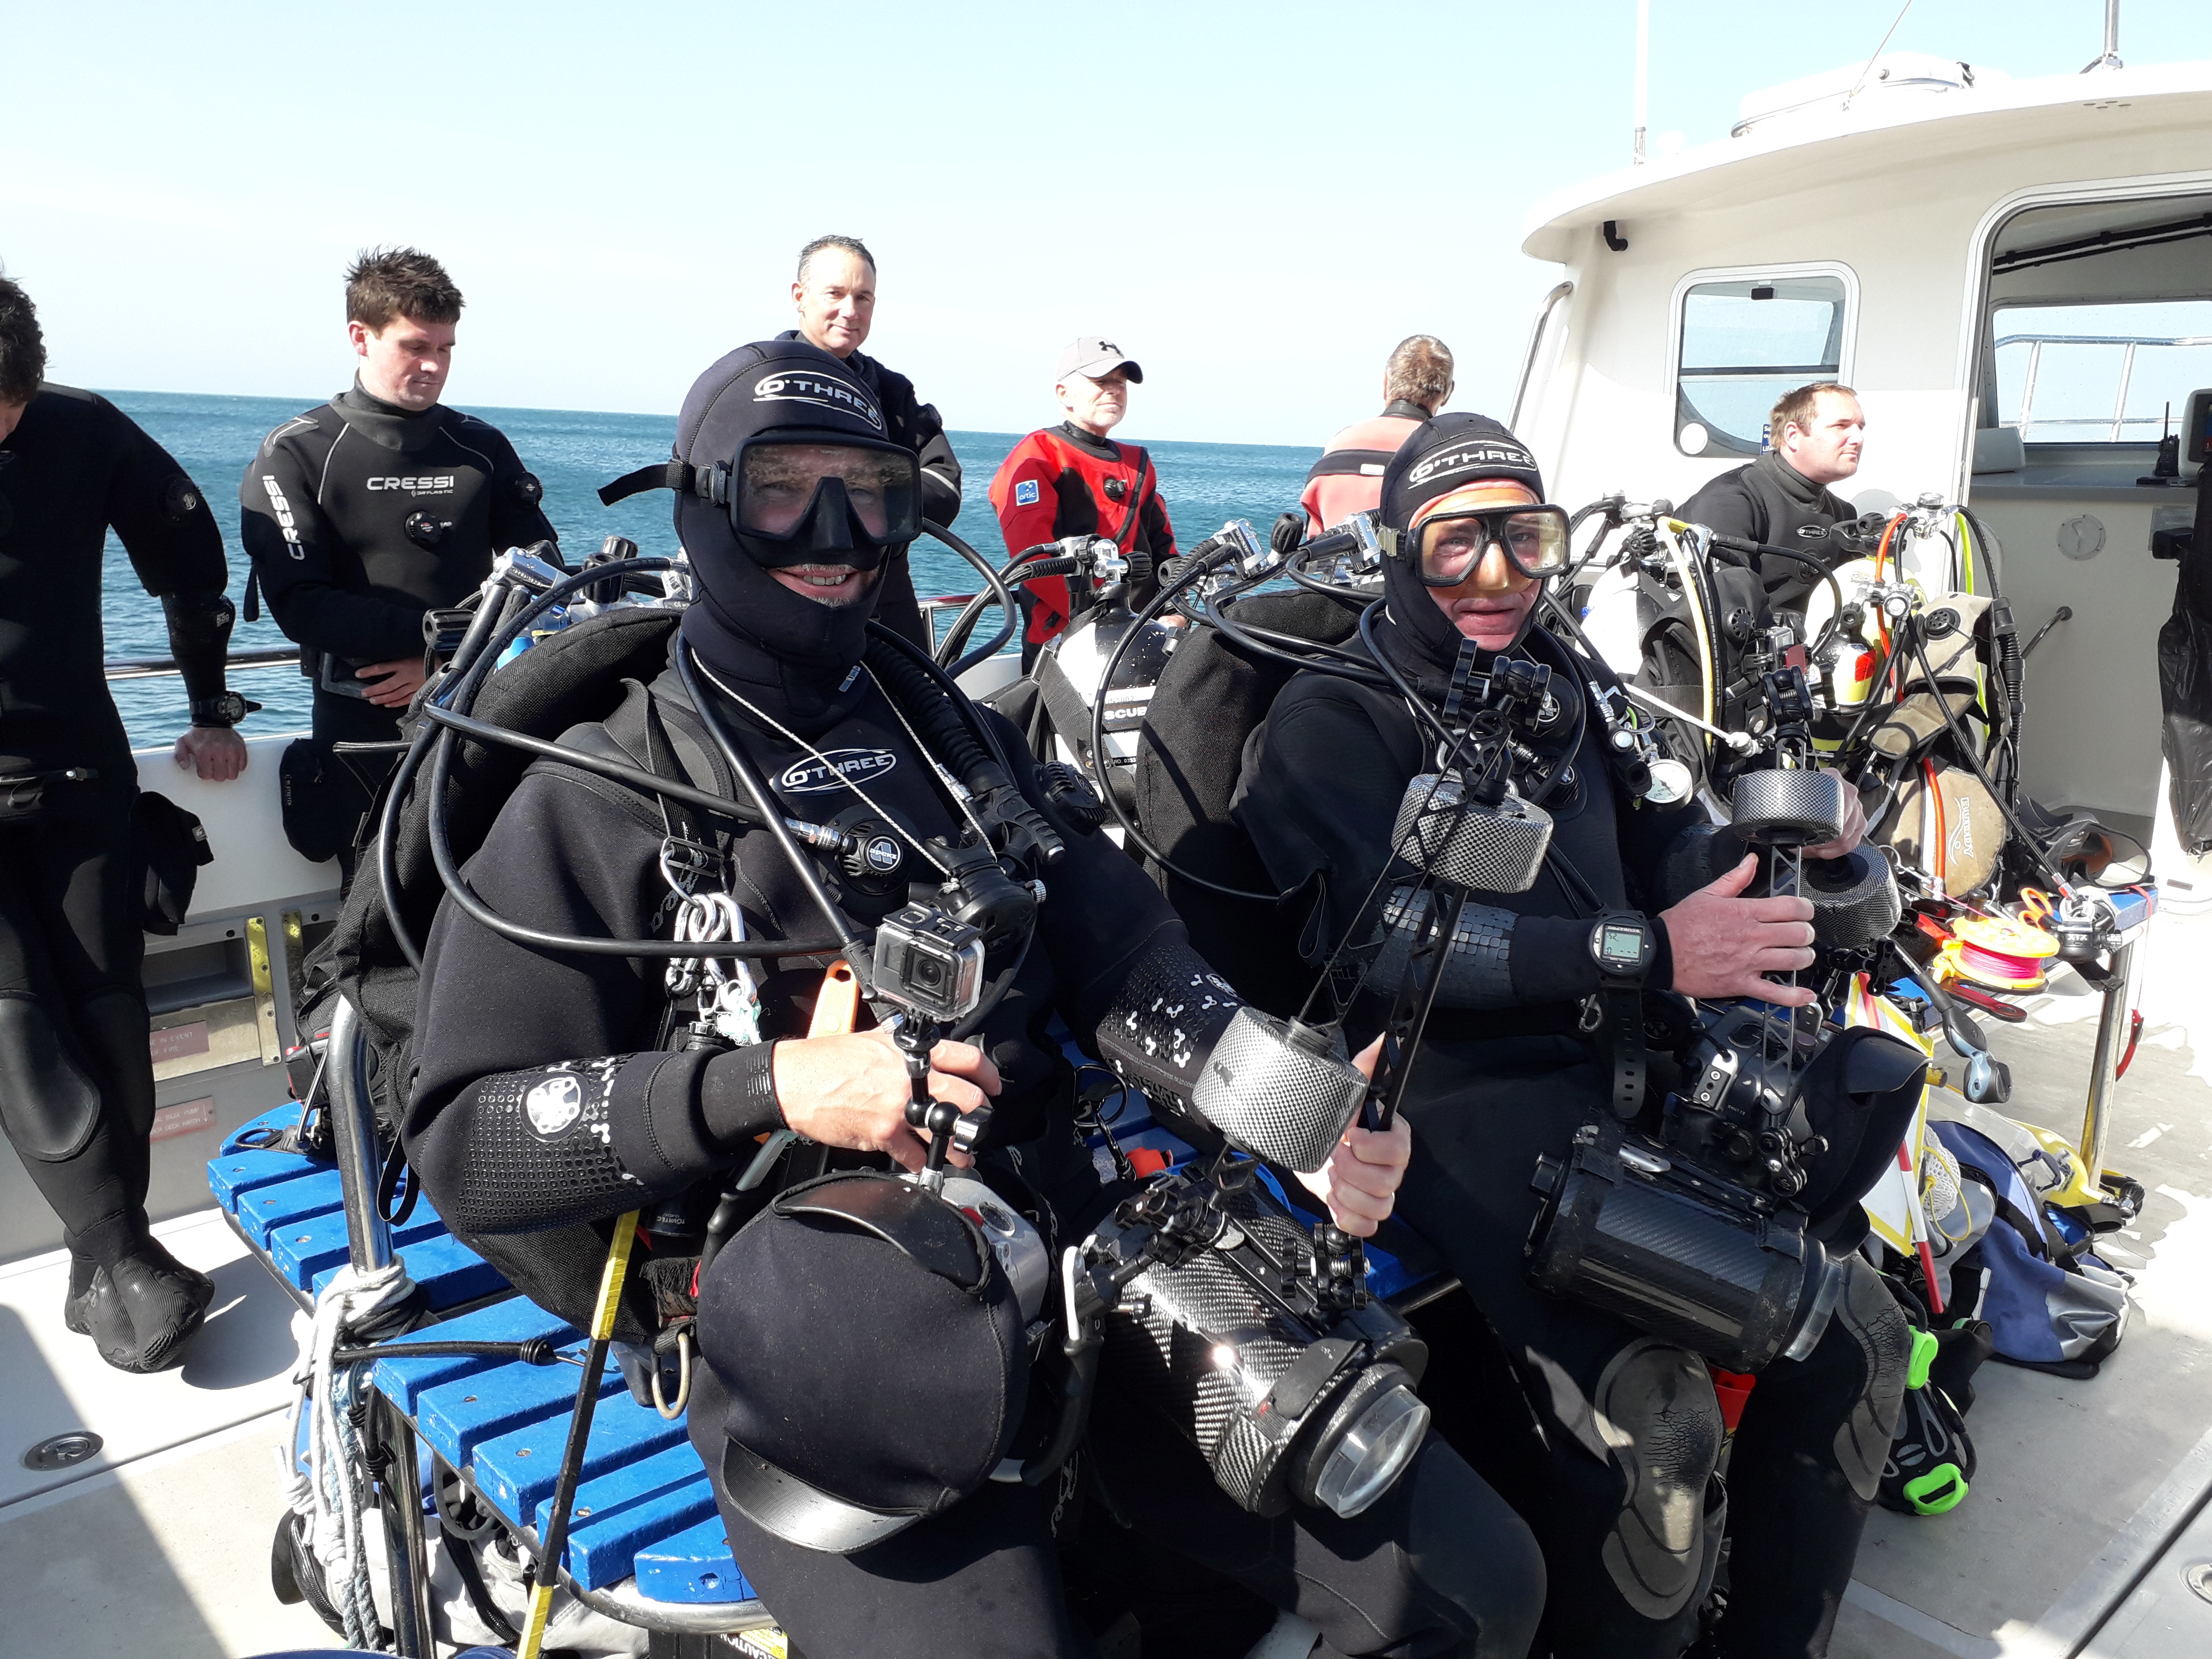 The Chesil team prepare to record at the Inshore Site, September 2019